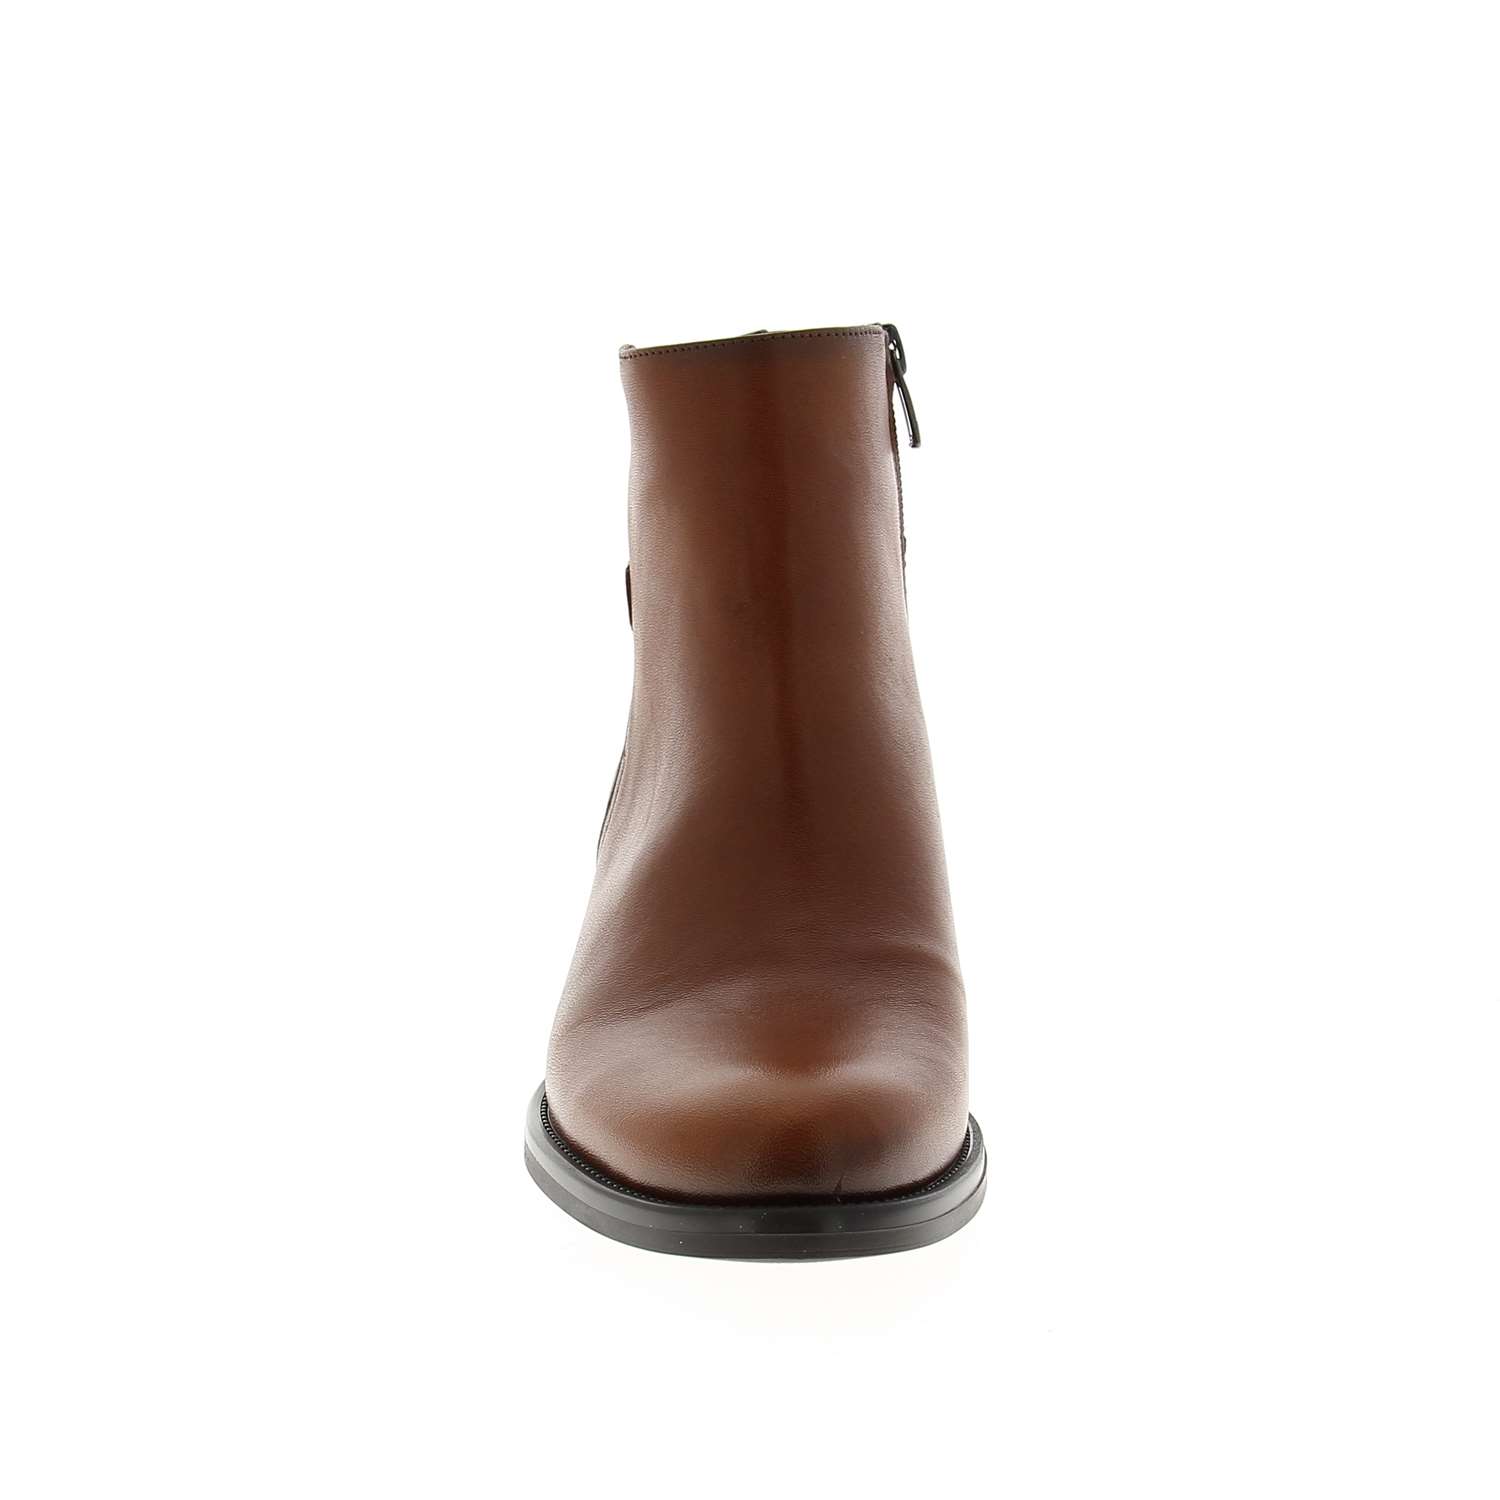 03 - DOLINOTE -  - Boots et bottines - Cuir